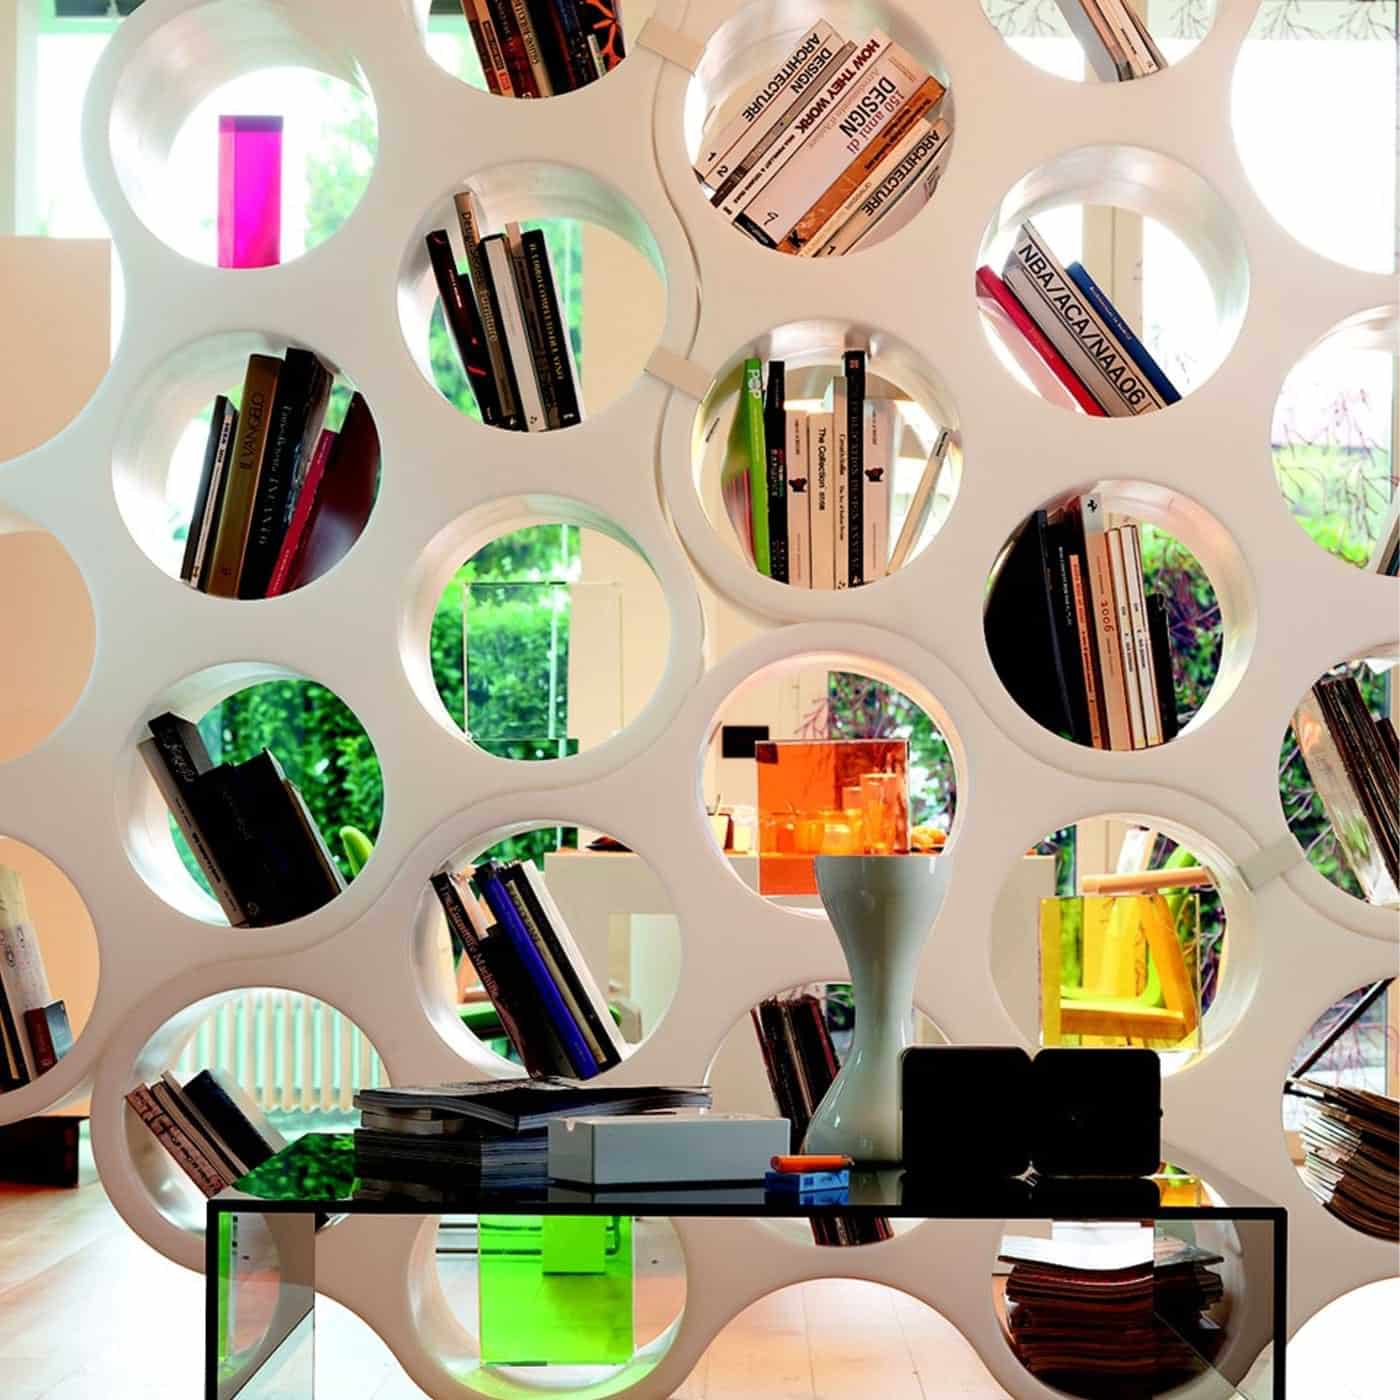 Cloud wall storage shelves design from Haworth